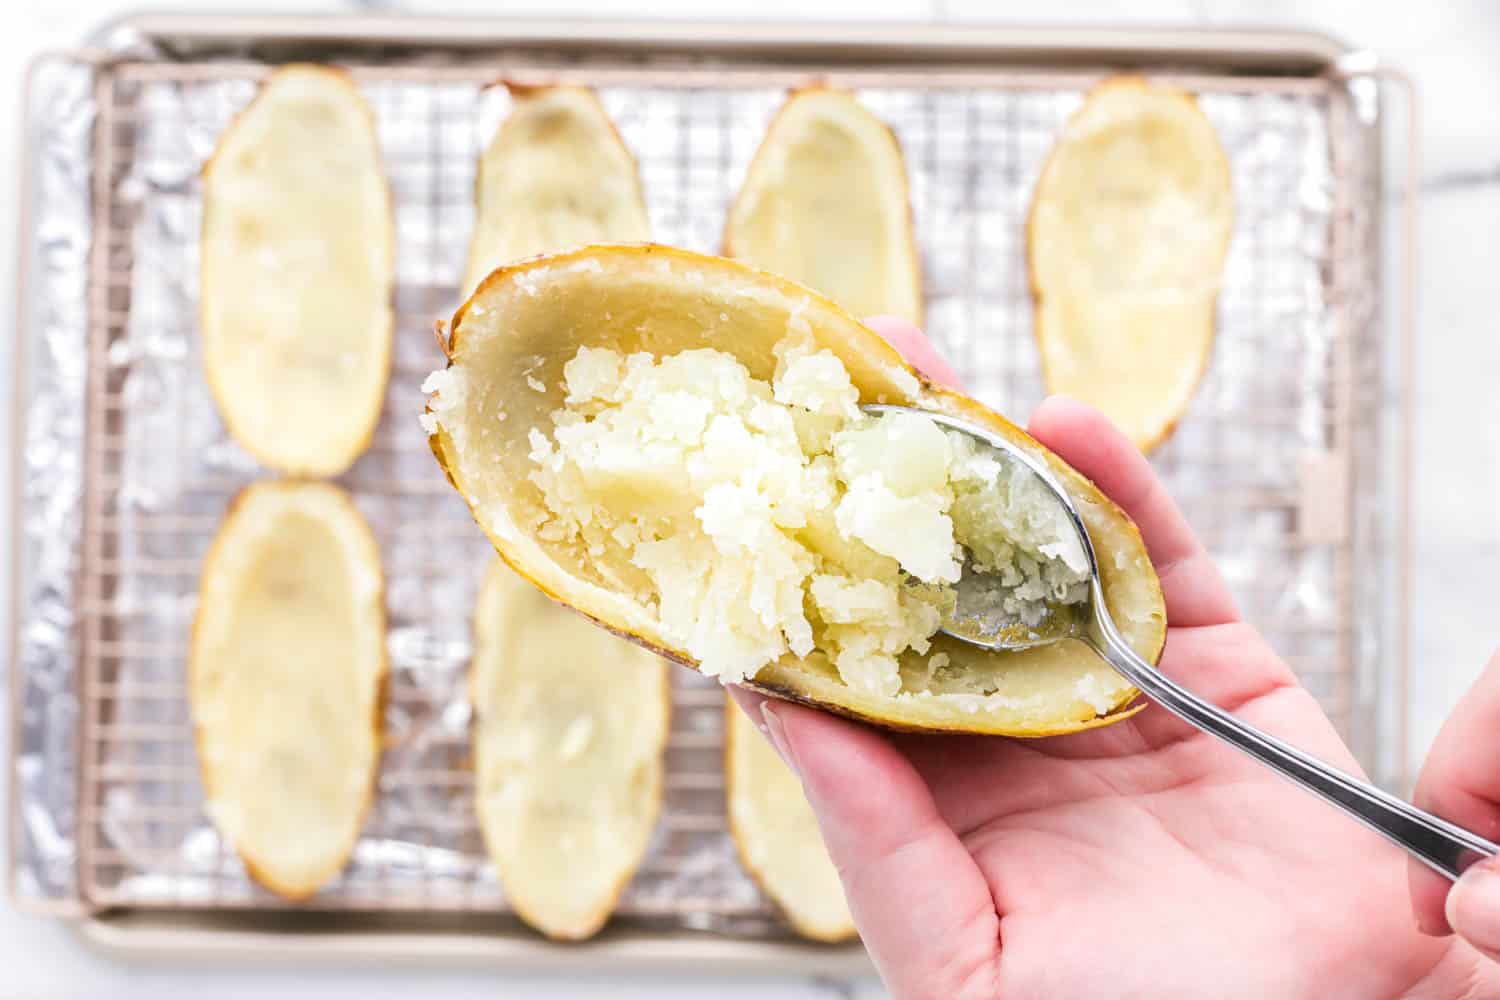 Scooping out potato flesh from each baked potato half